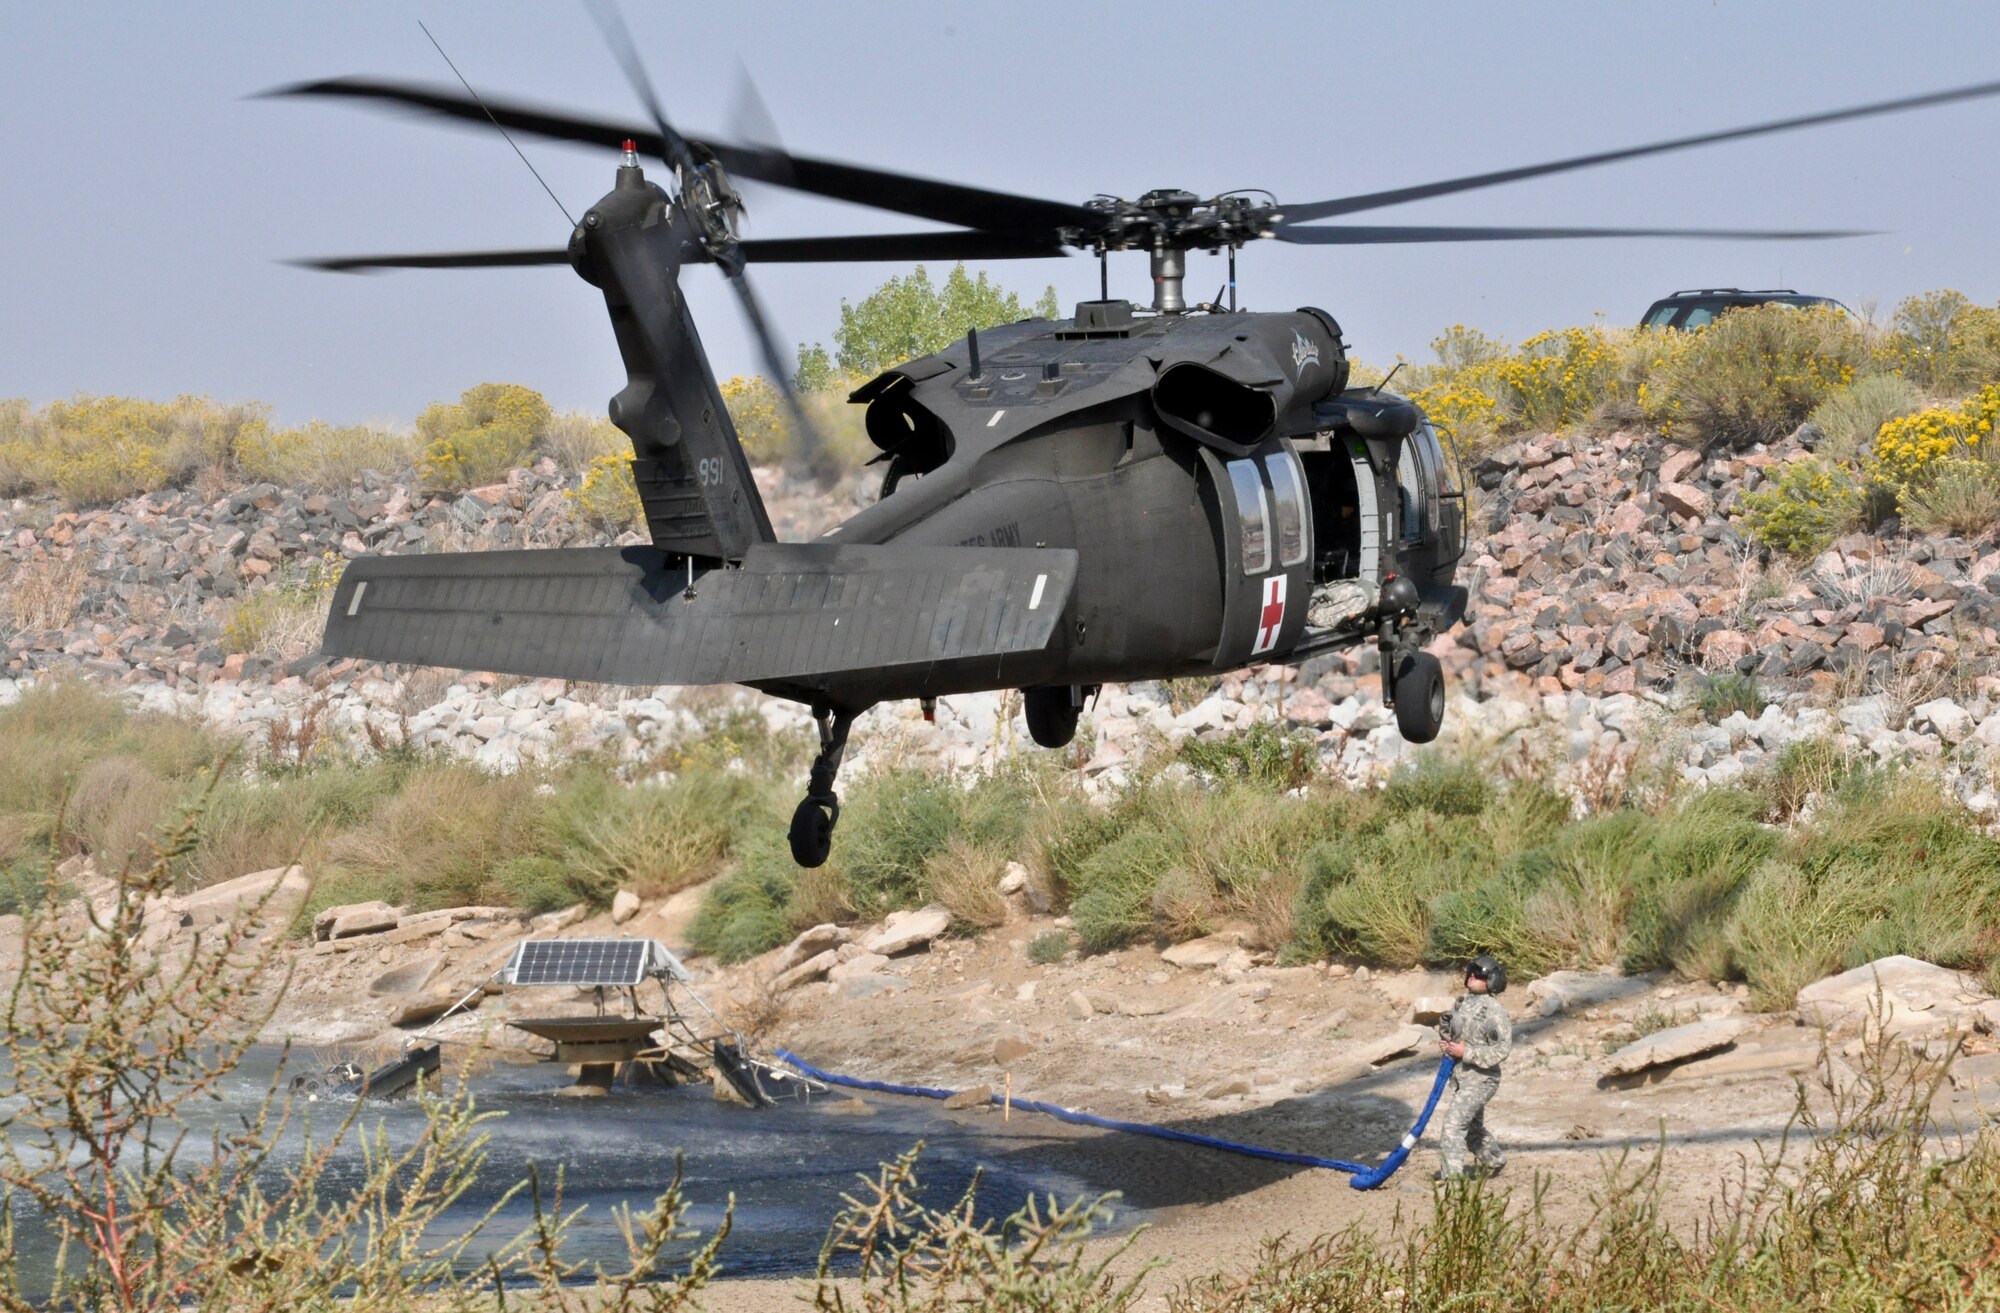 BUCKLEY AIR FORCE BASE, Colo. – A Colorado Army National Guard UH-60 Black Hawk helicopter prepares to connect the rigging required to lift a non-functioning aerator from Lake Williams Sept. 20, 2012. The 460th Civil Engineer Squadron biologist Krystal Phillips requested assistance from the COANG to lift the device from the lake. (U.S. Air Force photo by Staff Sgt. Nicholas Rau) 